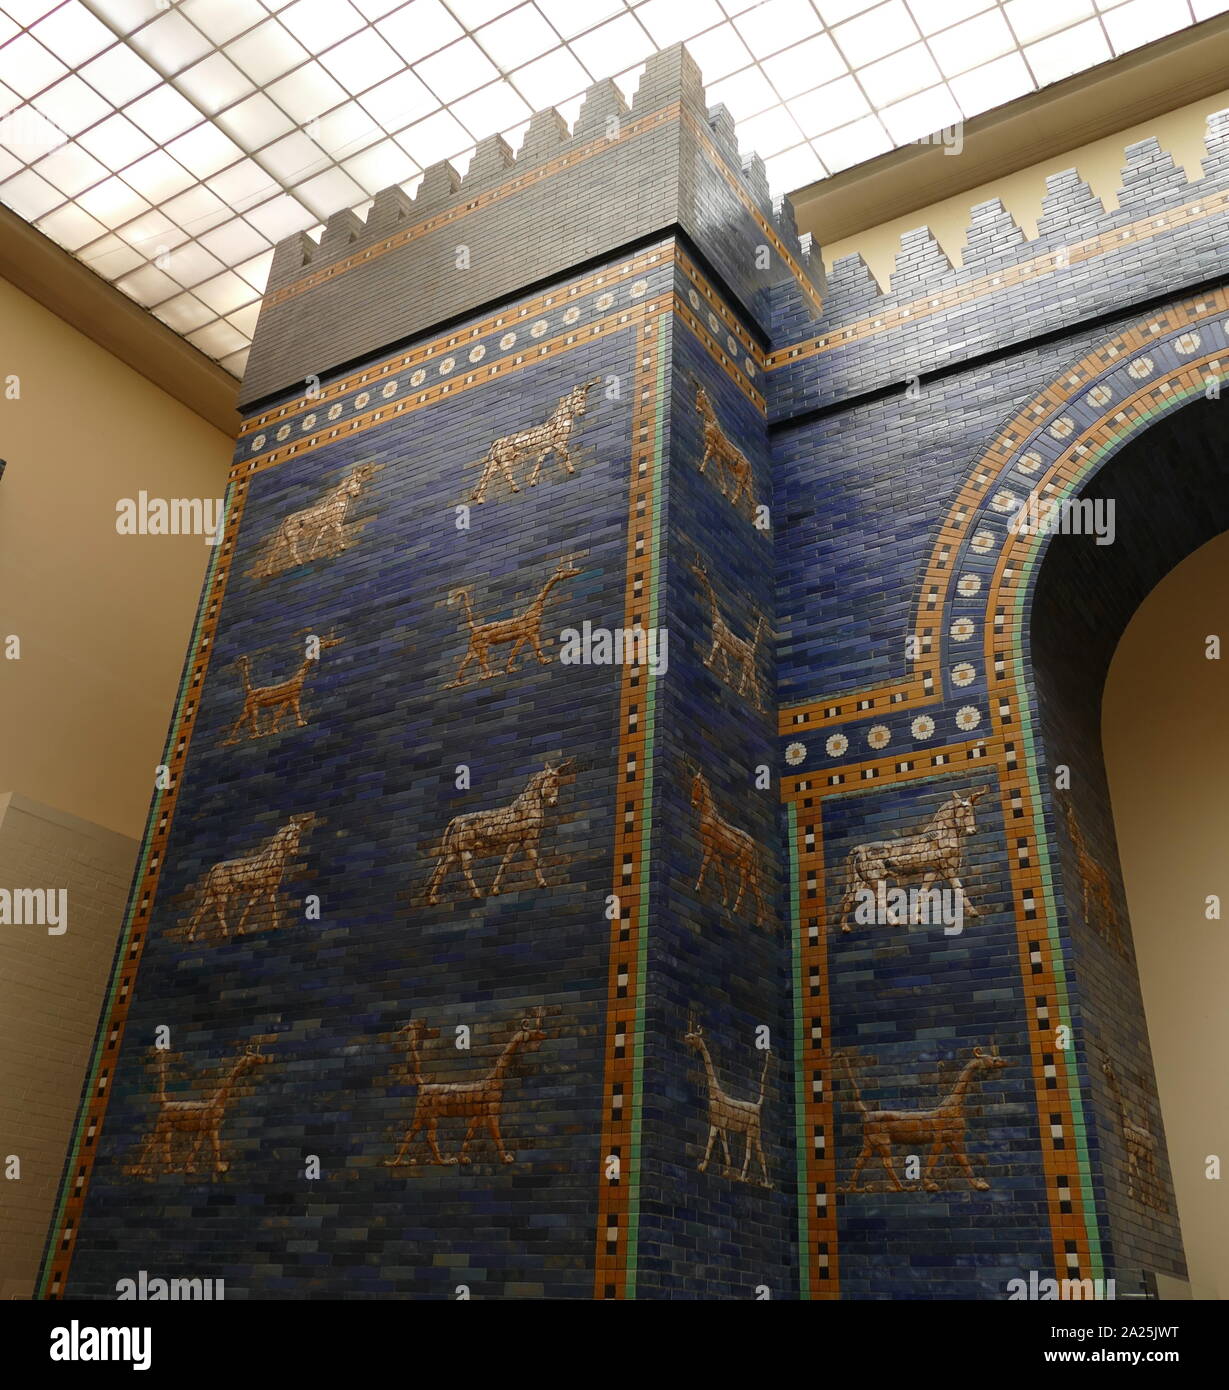 The Ishtar Gate Of Babylon Constructed In About 575 By Order Of King Nebuchadnezzar Ii On The North Side Of The City It Was Part Of A Grand Walled Processional Way